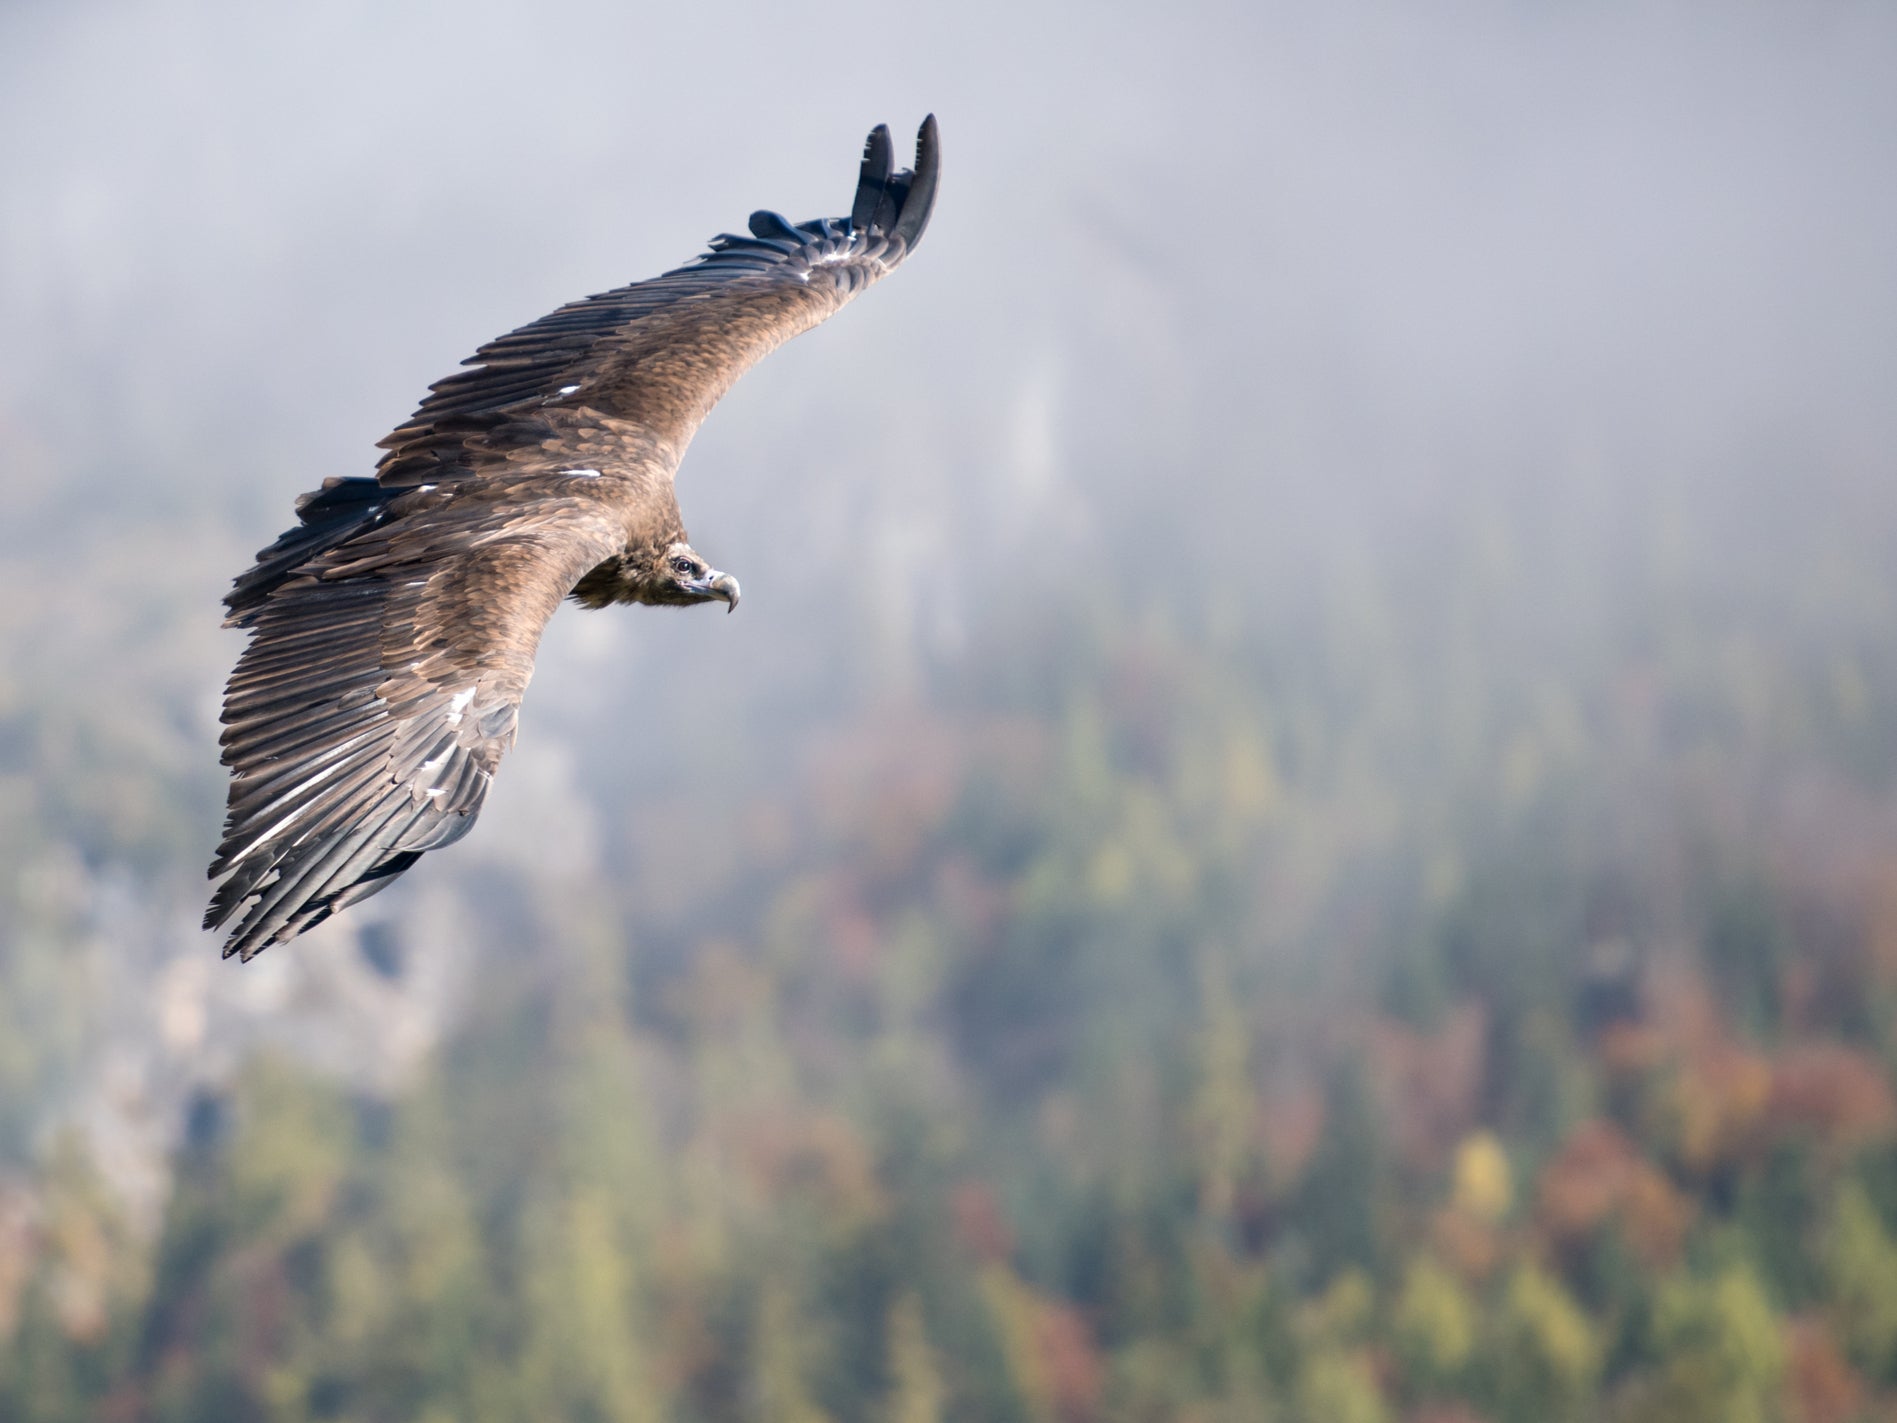 Cinereous vultures were almost extinct in Europe in the mid-20th century, but now Spain has over 2,500 breeding pairs which are helping to repopulate other regions